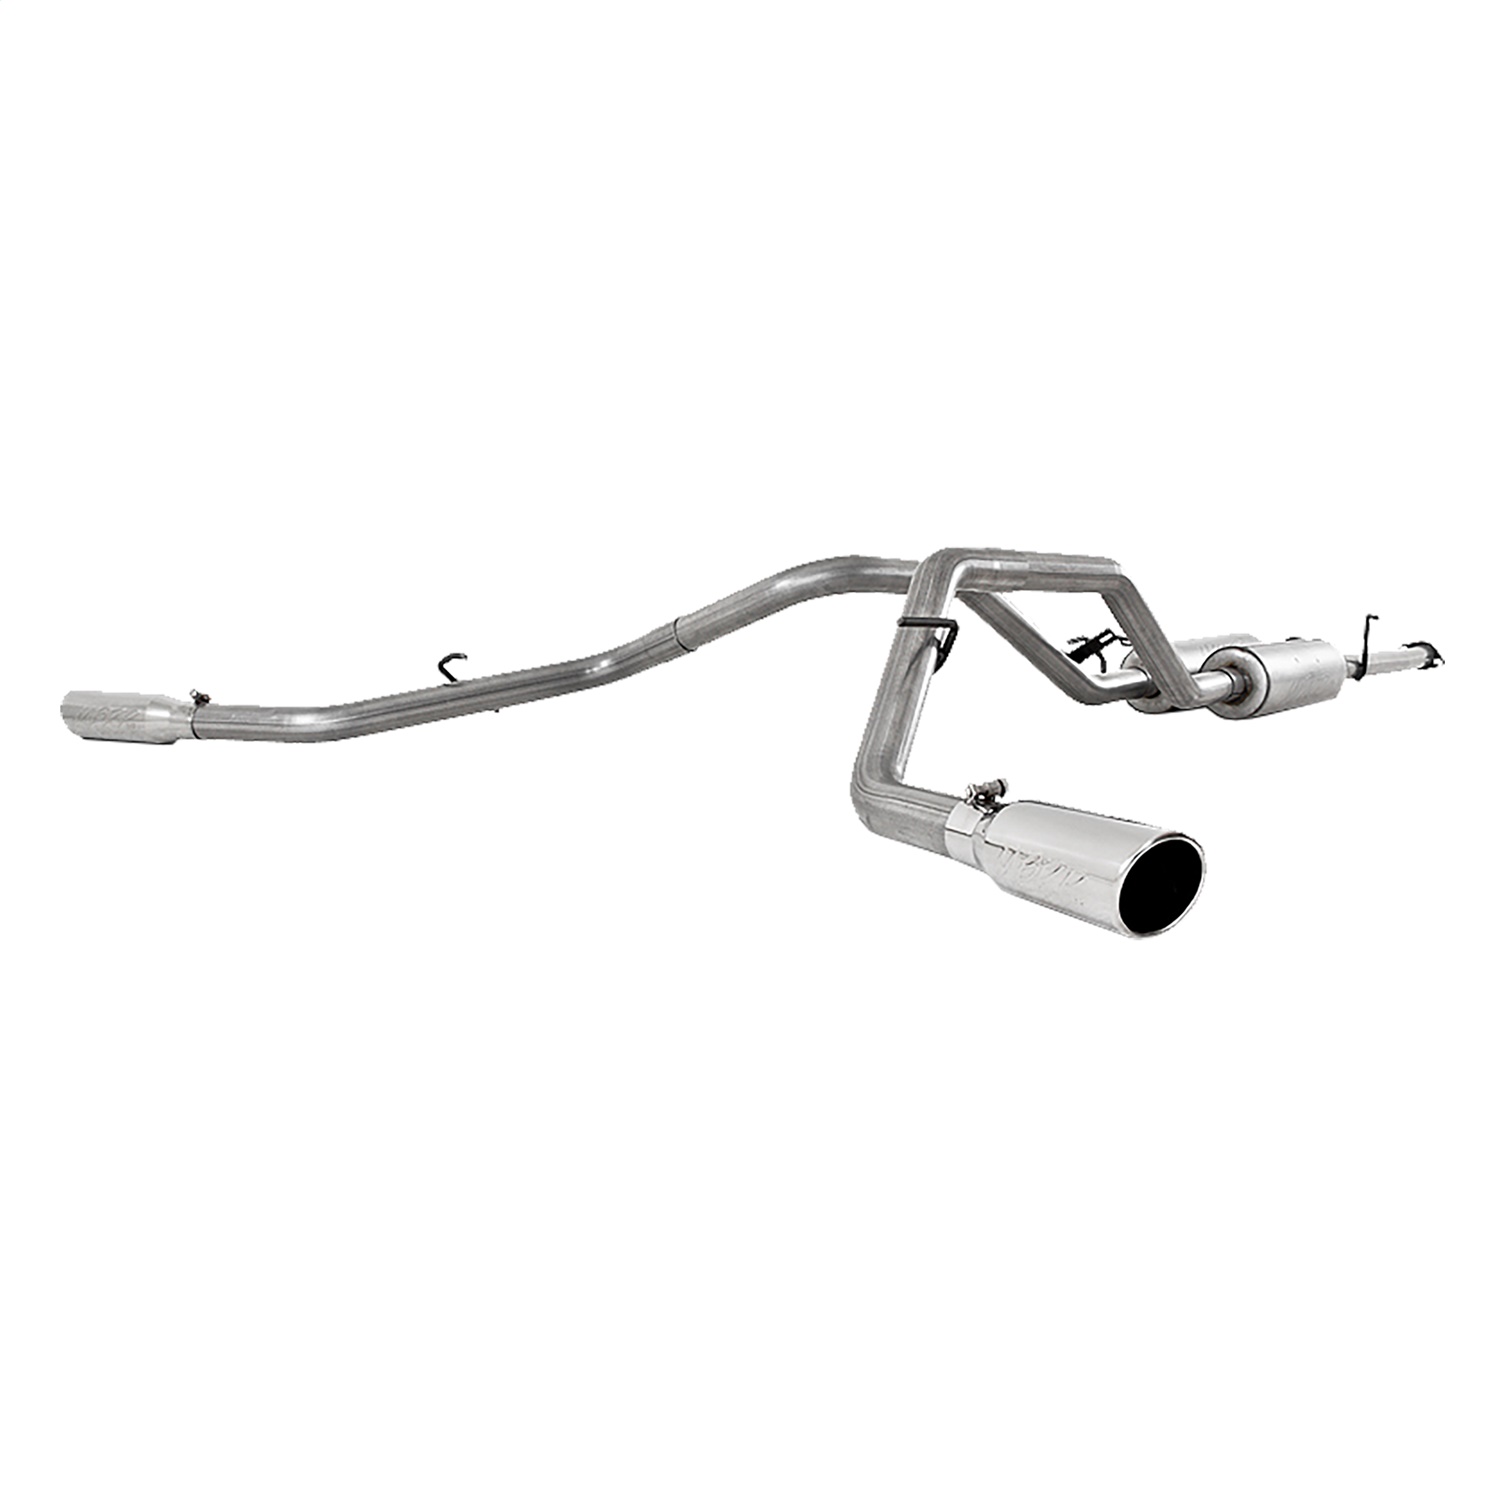 MBRP Exhaust S5316409 Armor Plus Cat Back Exhaust System Fits 09-21 Tundra